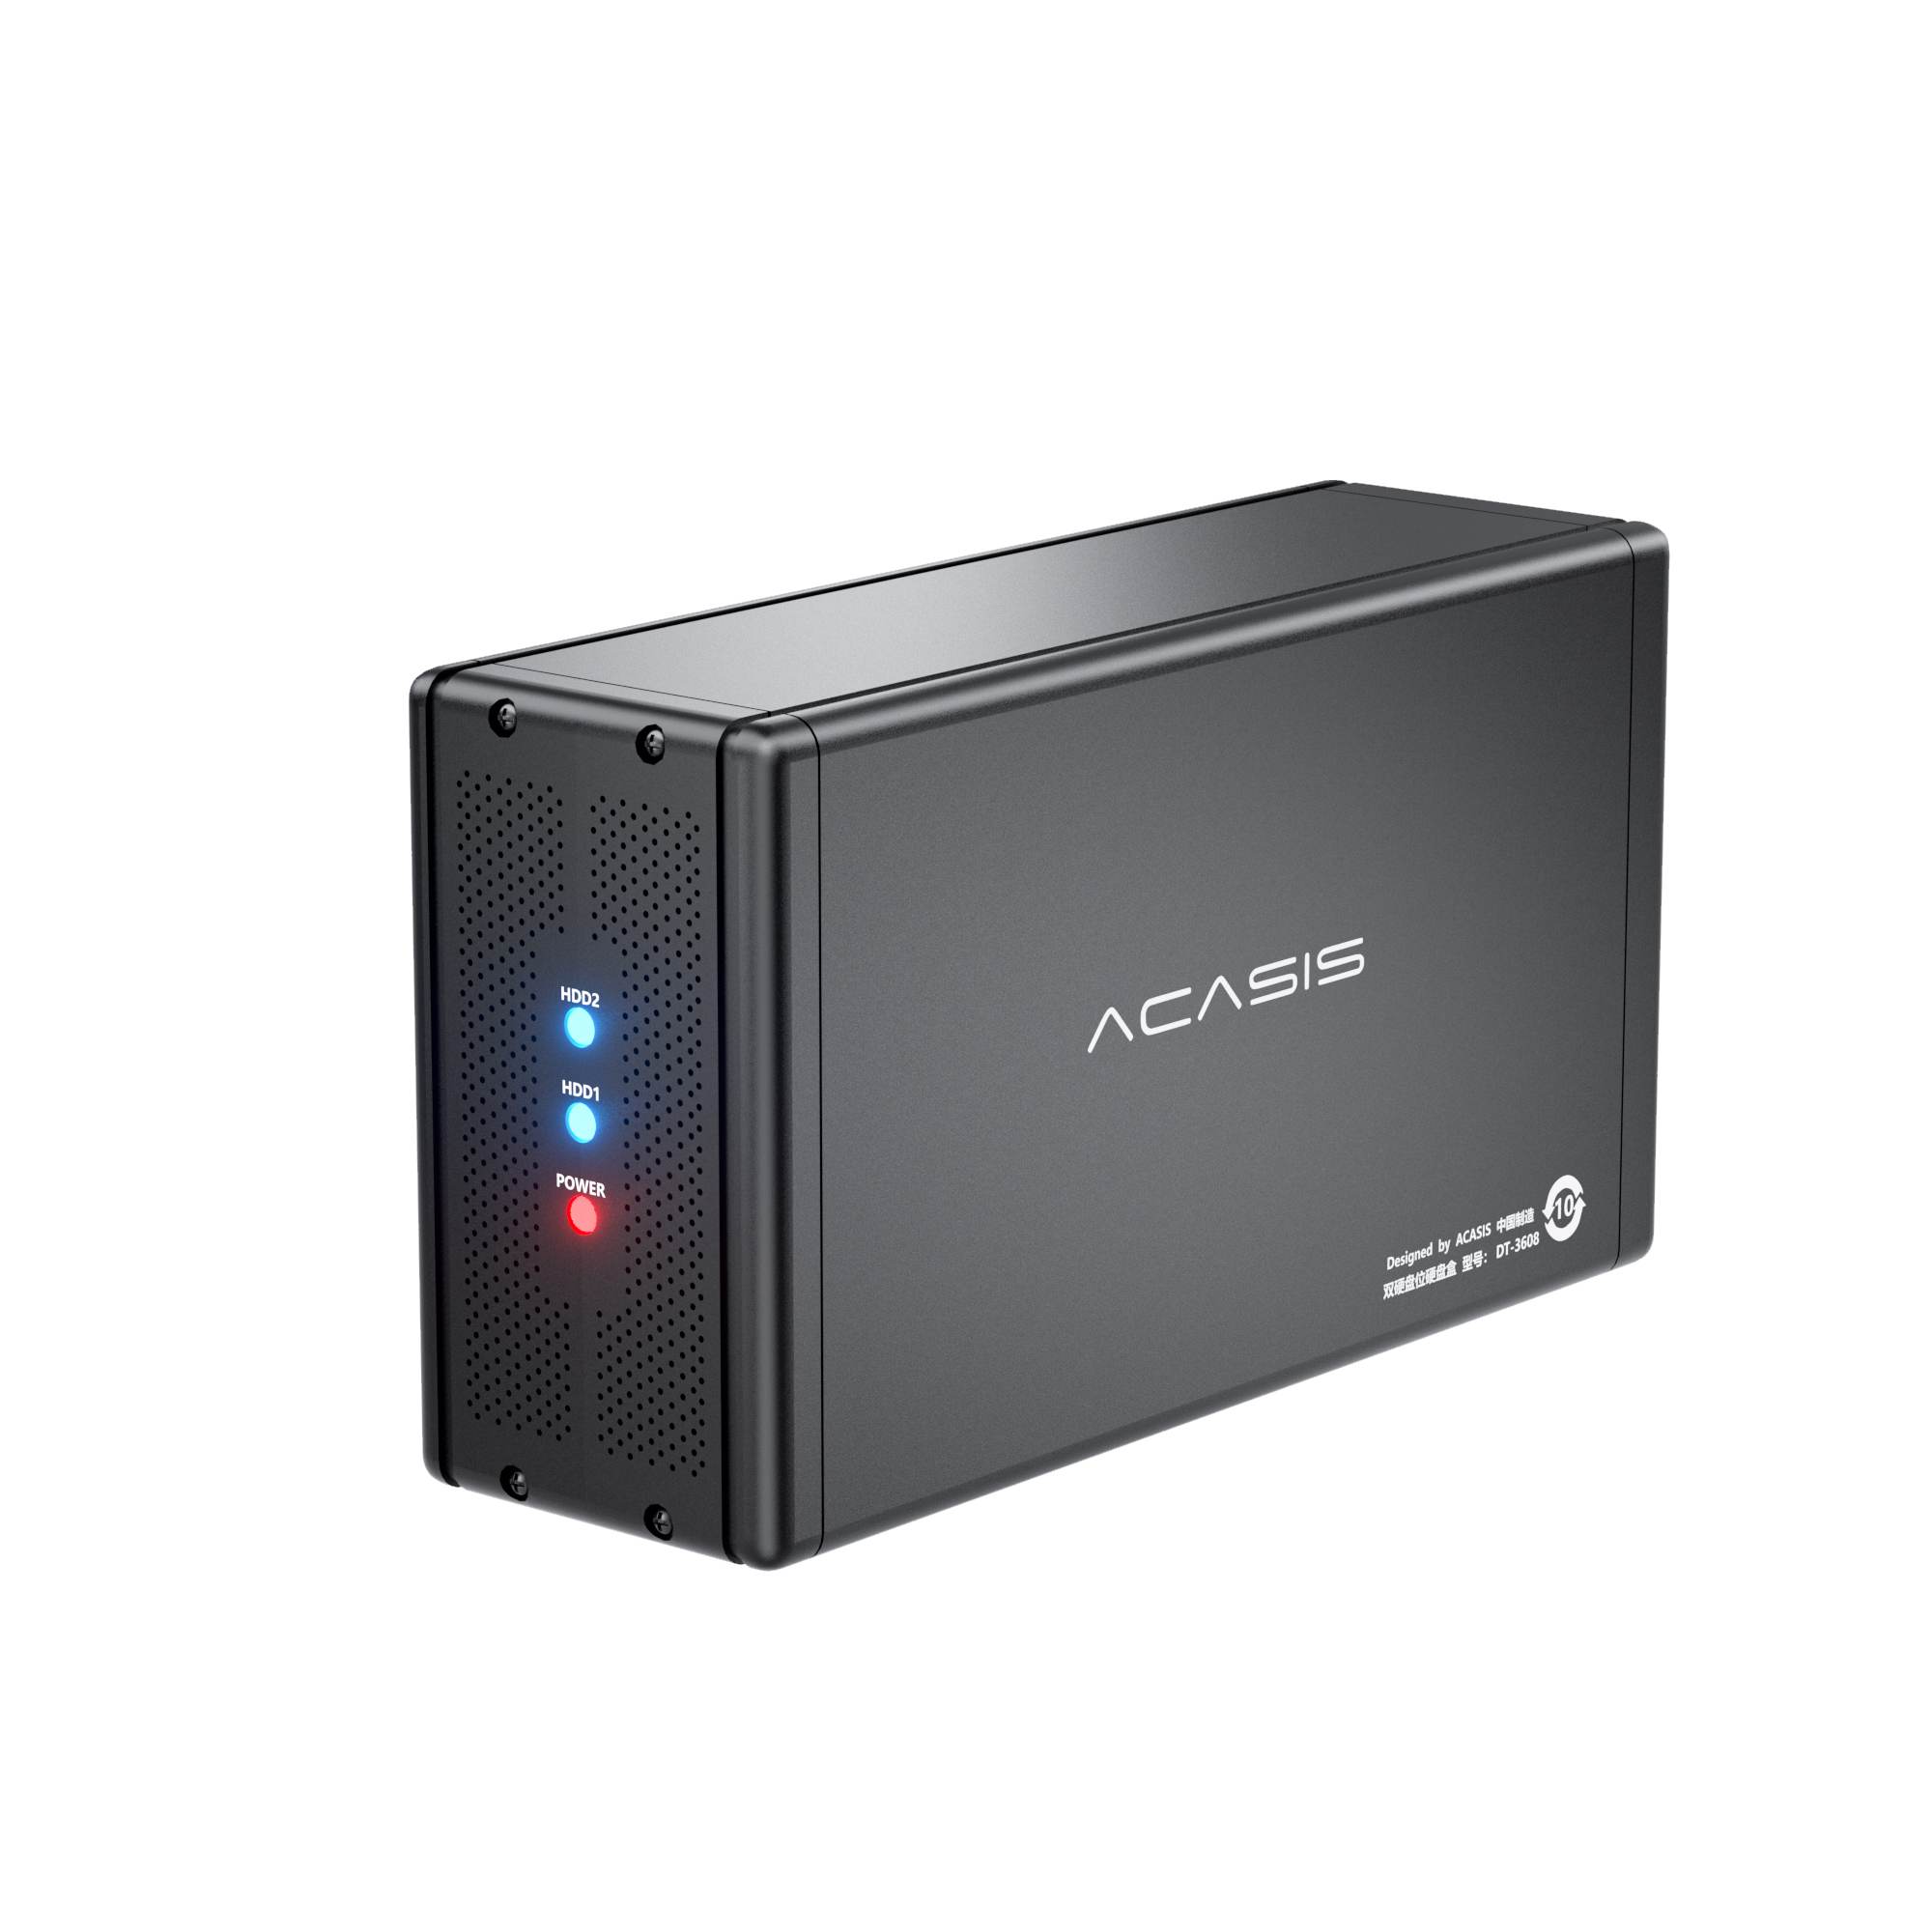 ACASIS 3.5-inch Dual-Bay External HDD SSD Disk Array Enclosure 5GBS USB 3.0  to SATA , Support 18TB 